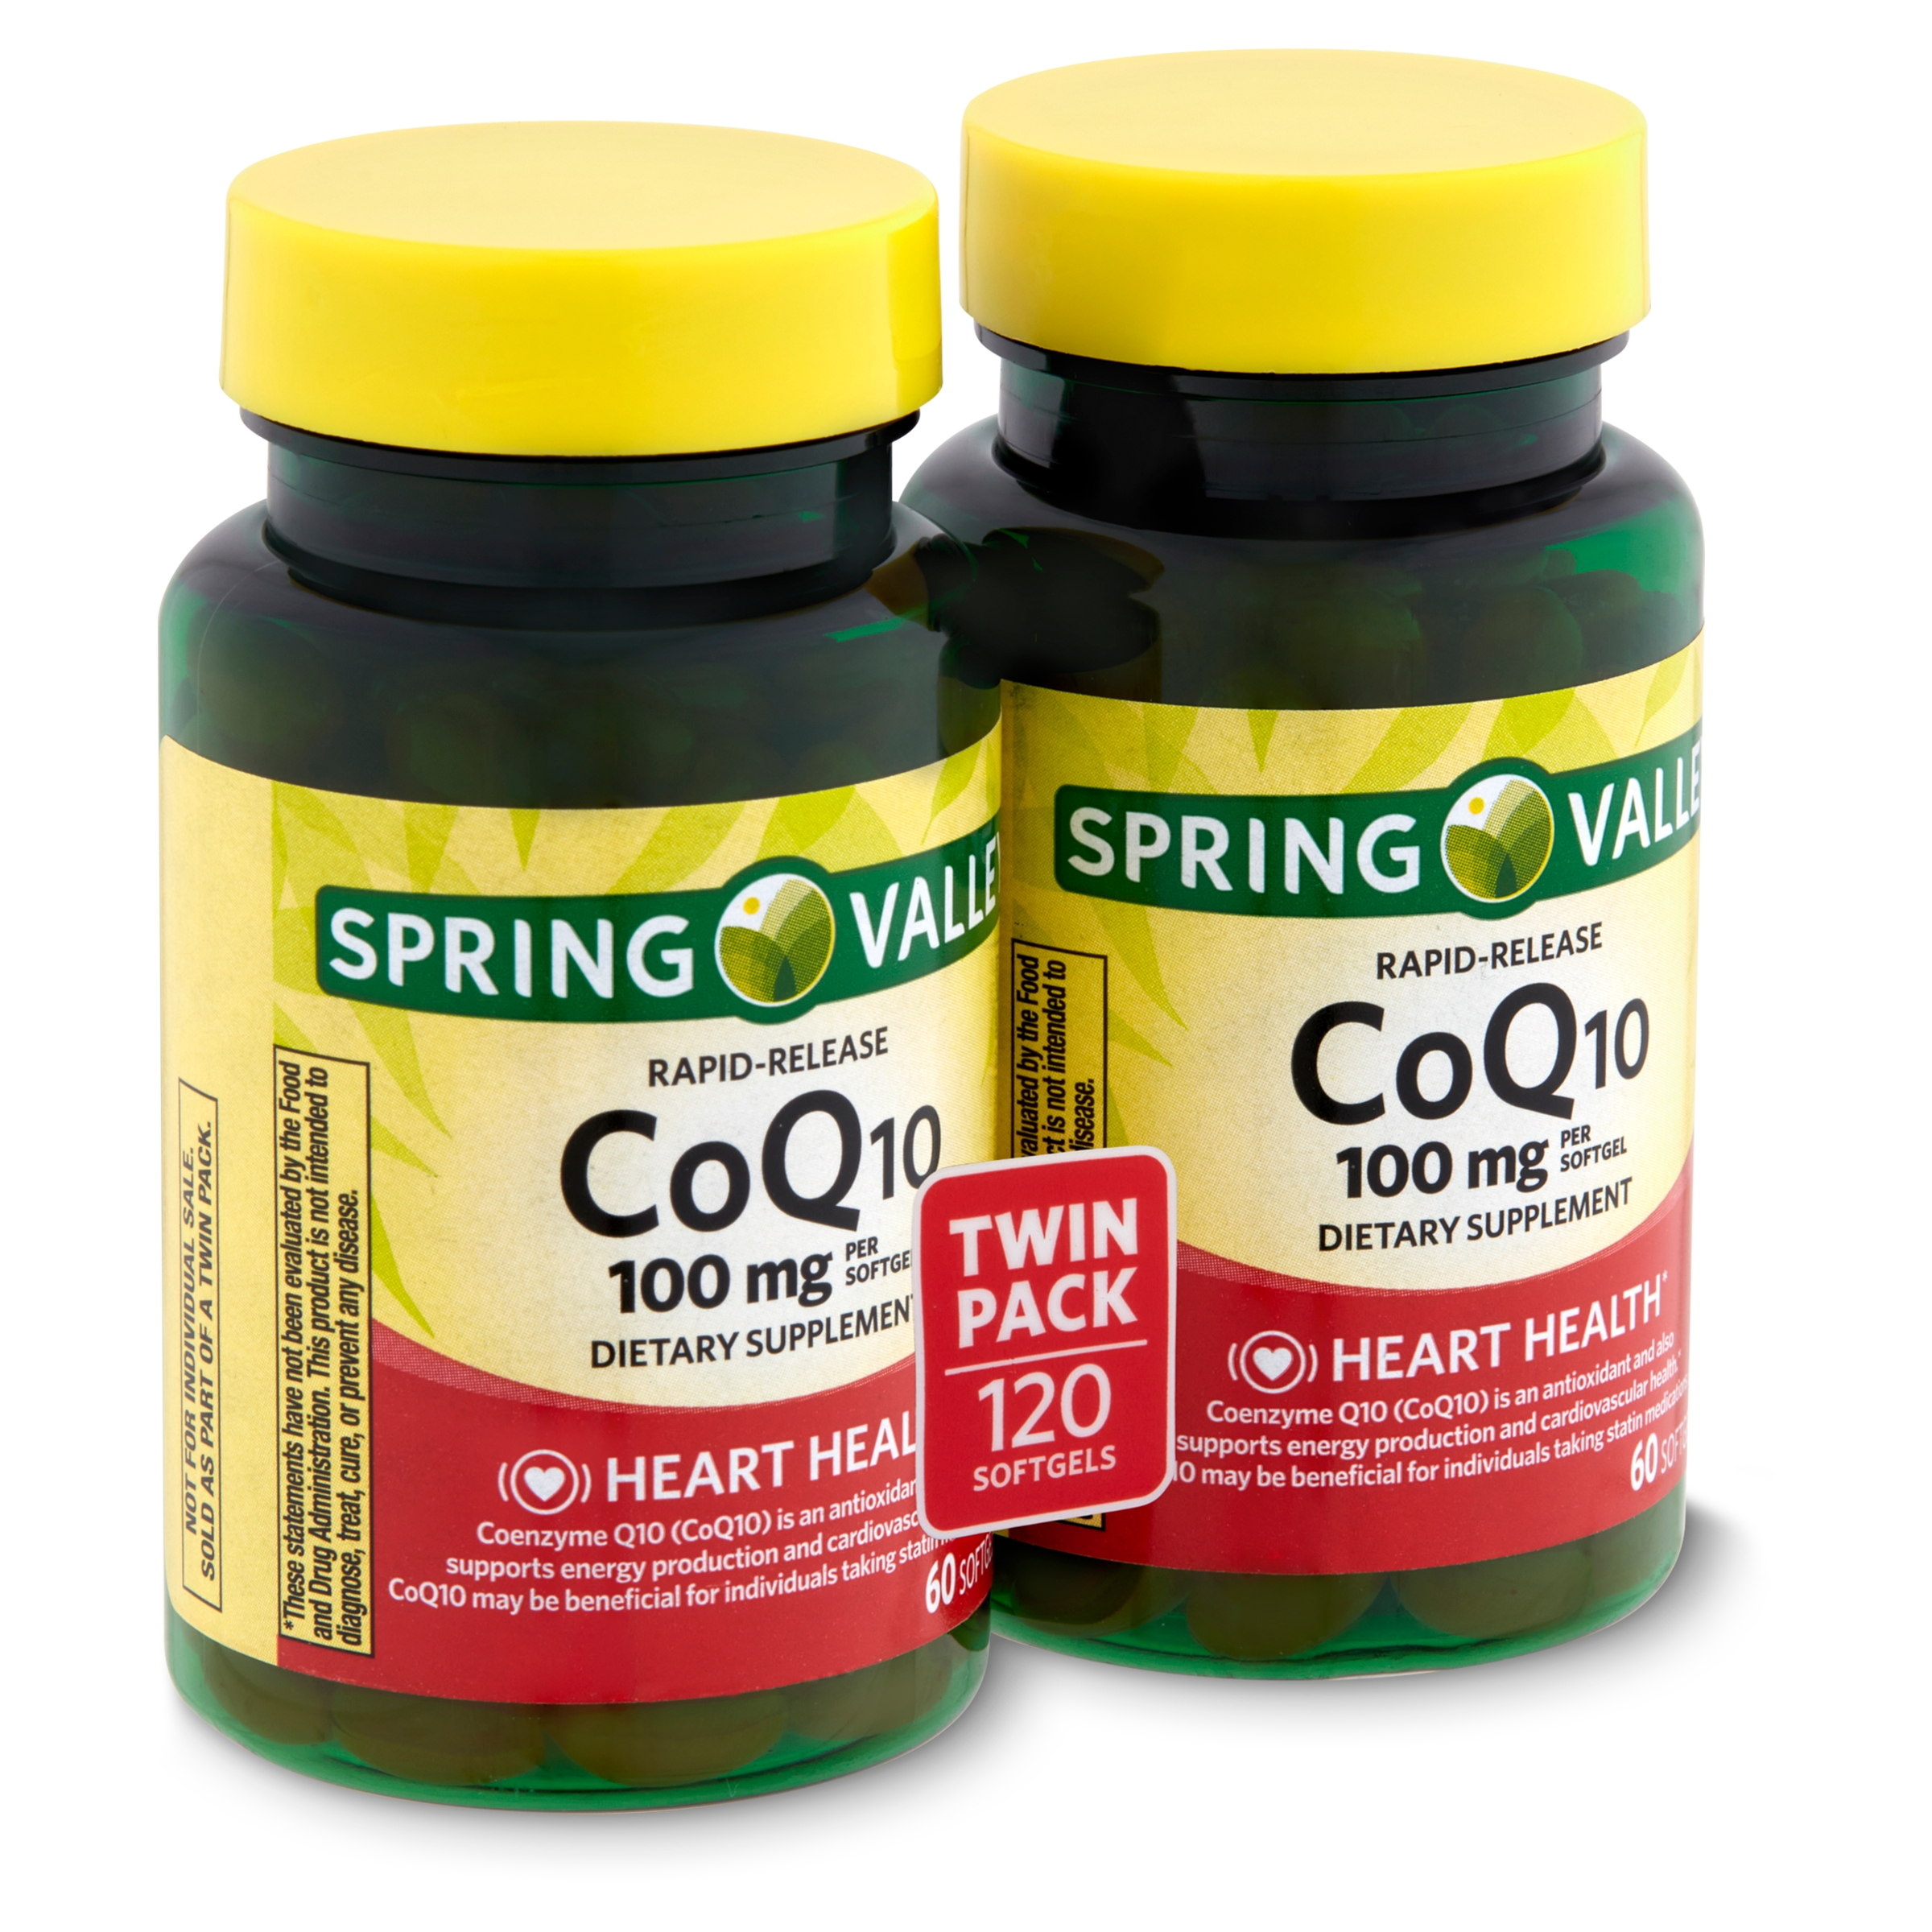 Spring Valley Rapid-Release CoQ10 Dietary Supplement 100mg Softgels, 60 Count, 2 Pack - image 6 of 8